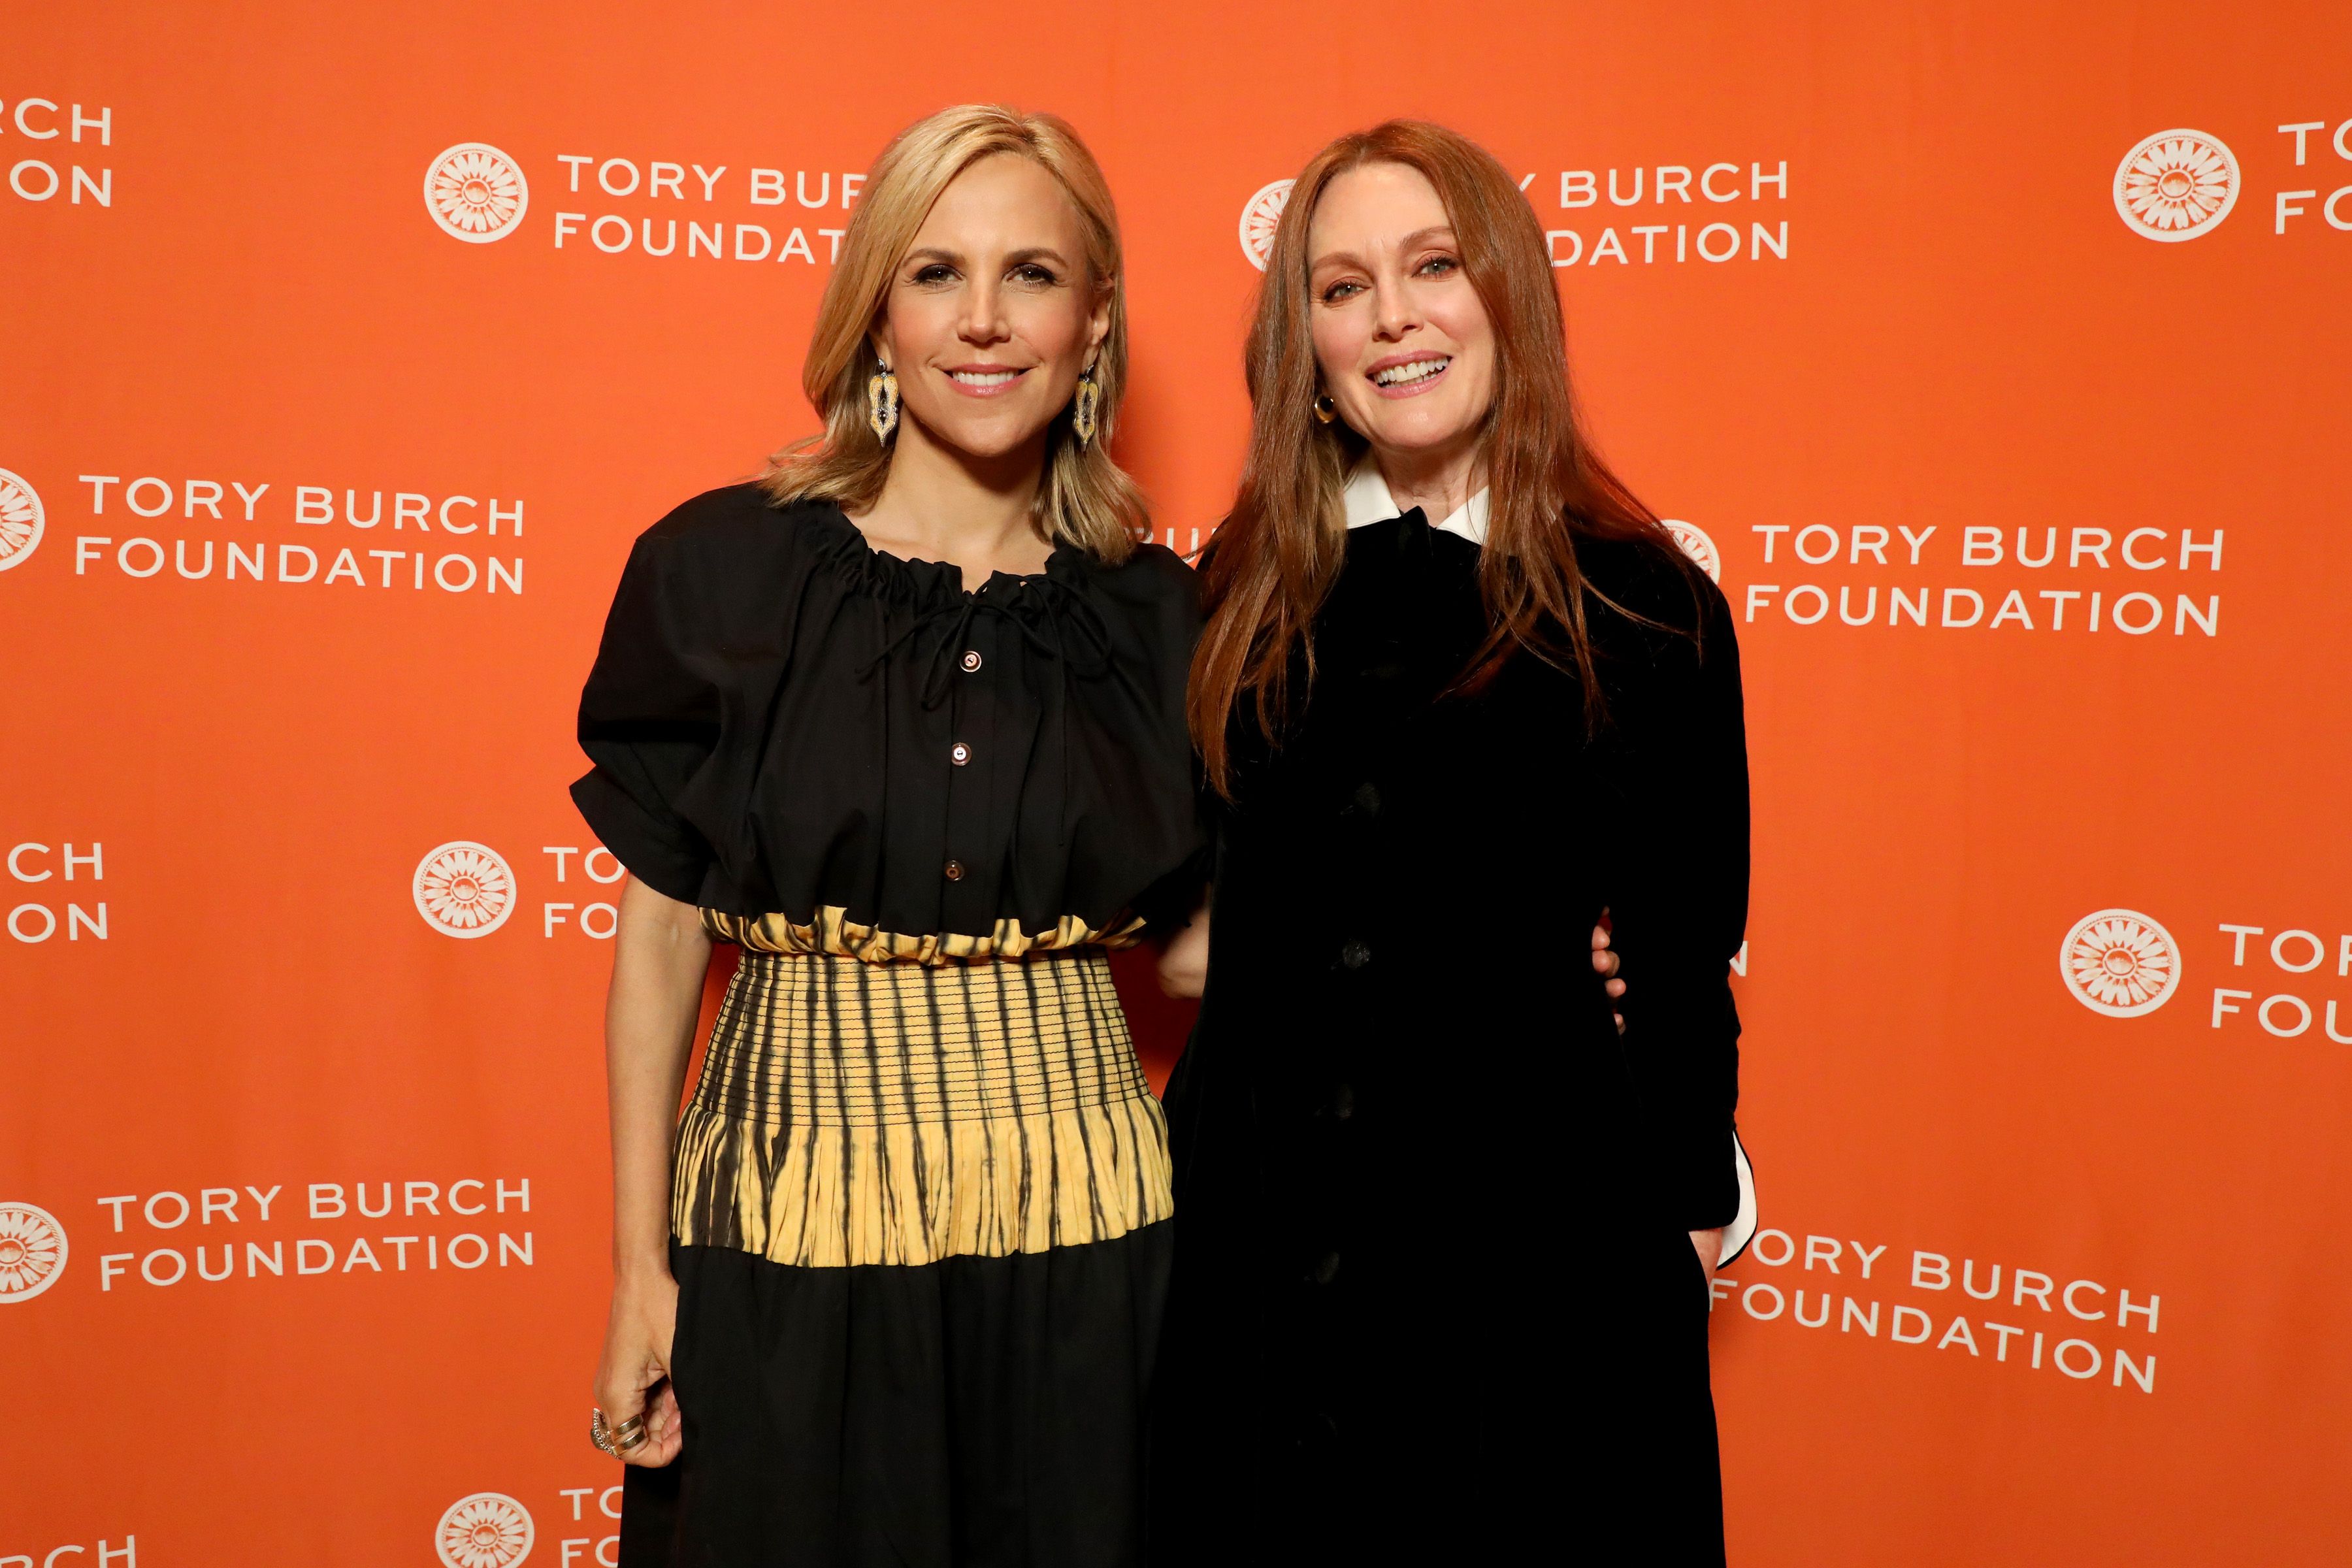 Julianne Moore and Tory Burch Advocate for Gun Control at Summit